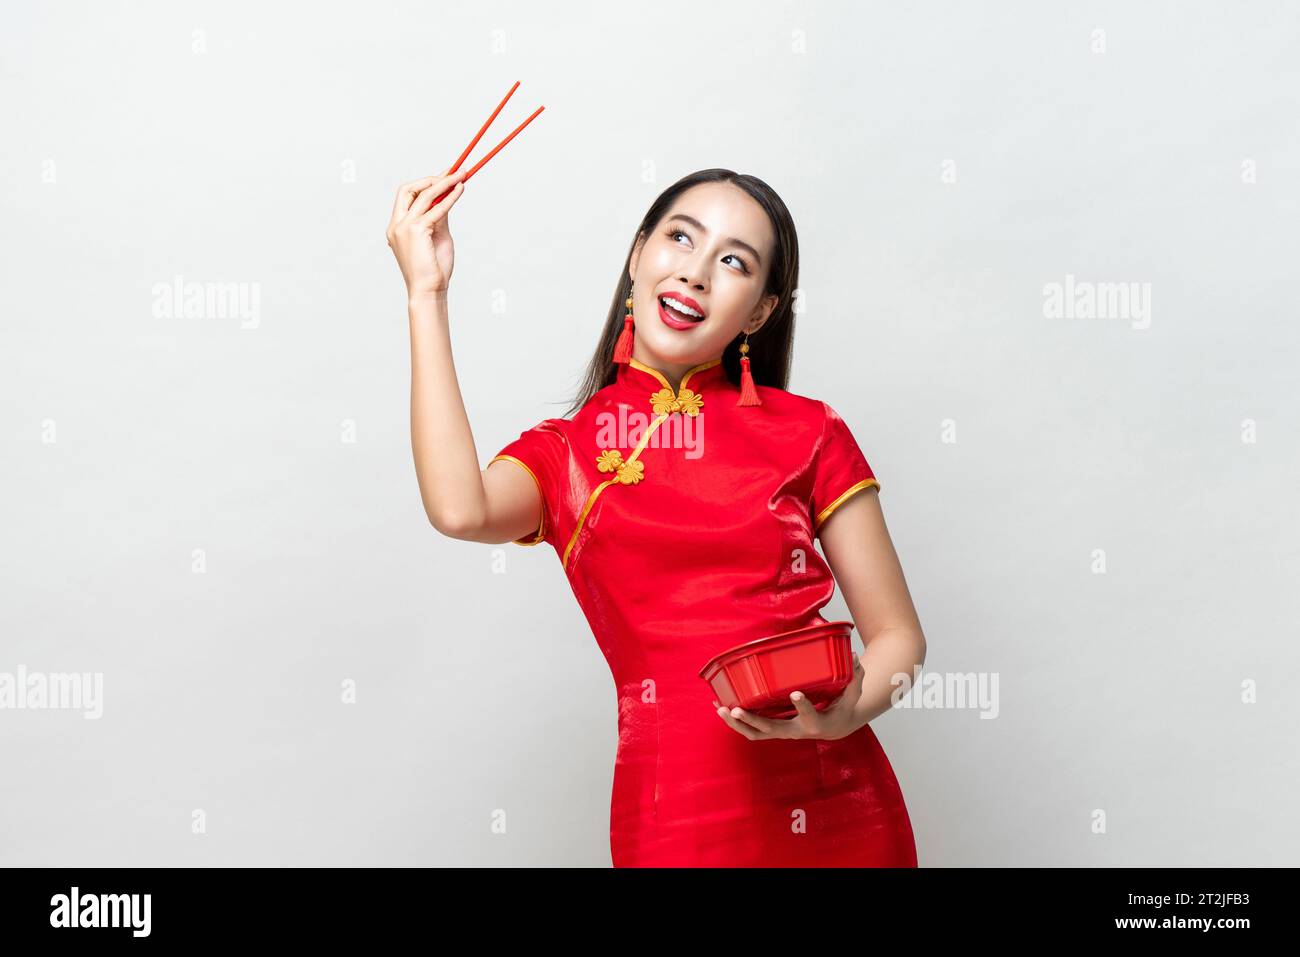 Cheerful Asian female in traditional red dress raising arm with chopsticks and looking up with smile against gray background Stock Photo